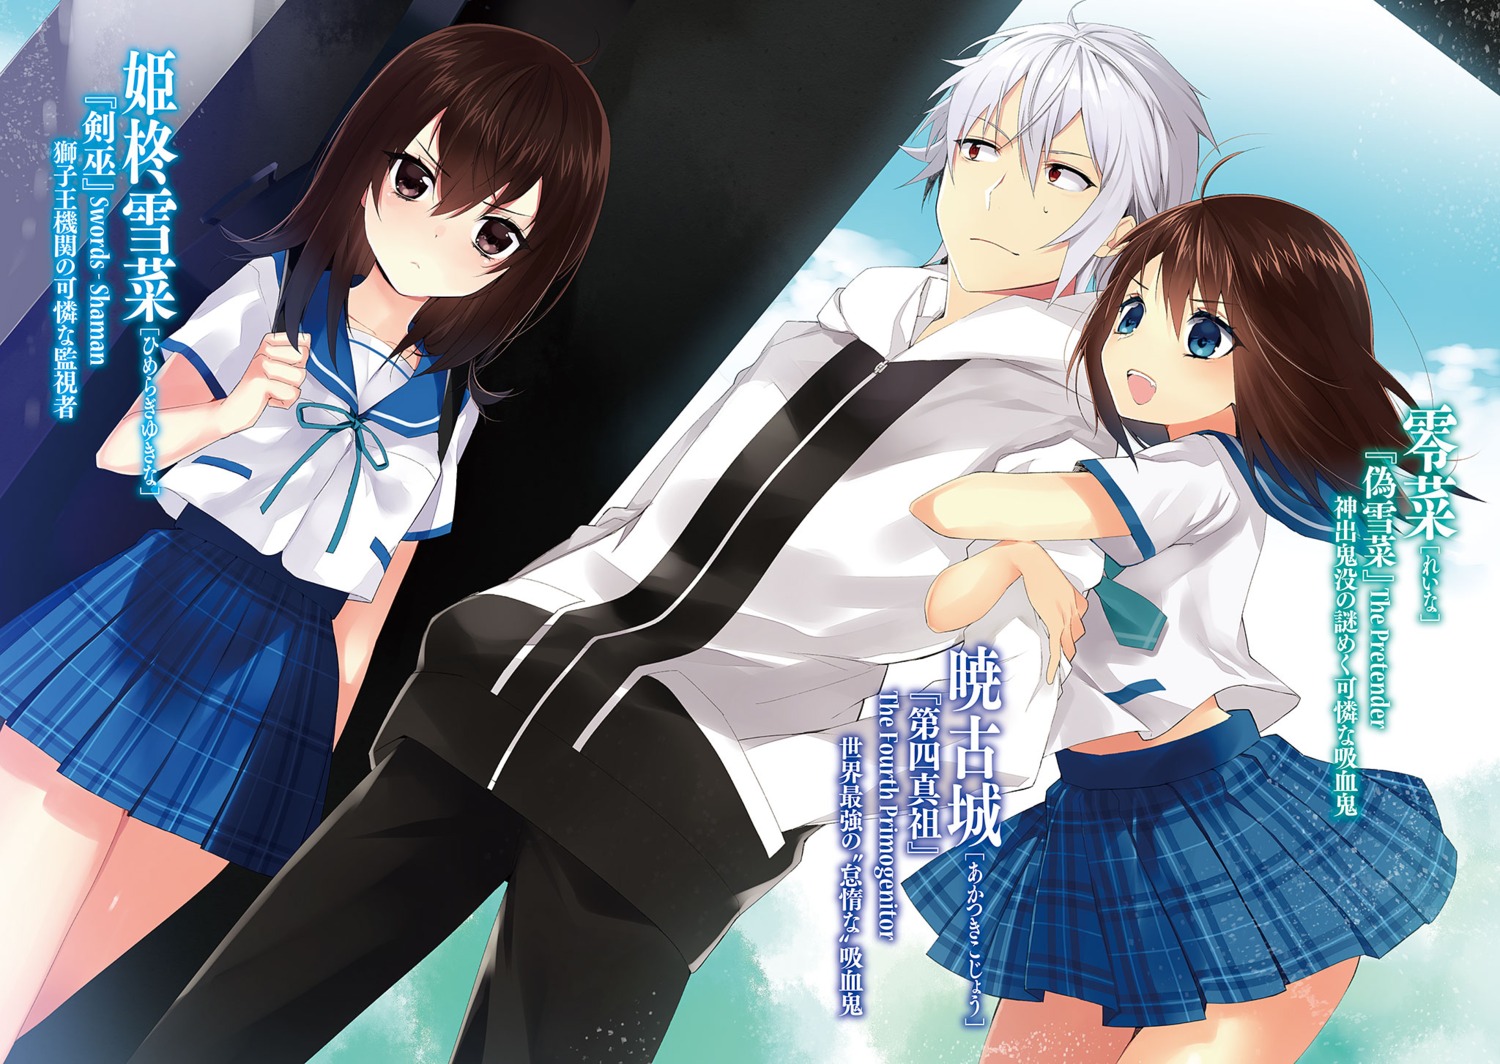 Strike the Blood Art Book #2 Cover Illustration! by Manyako : r